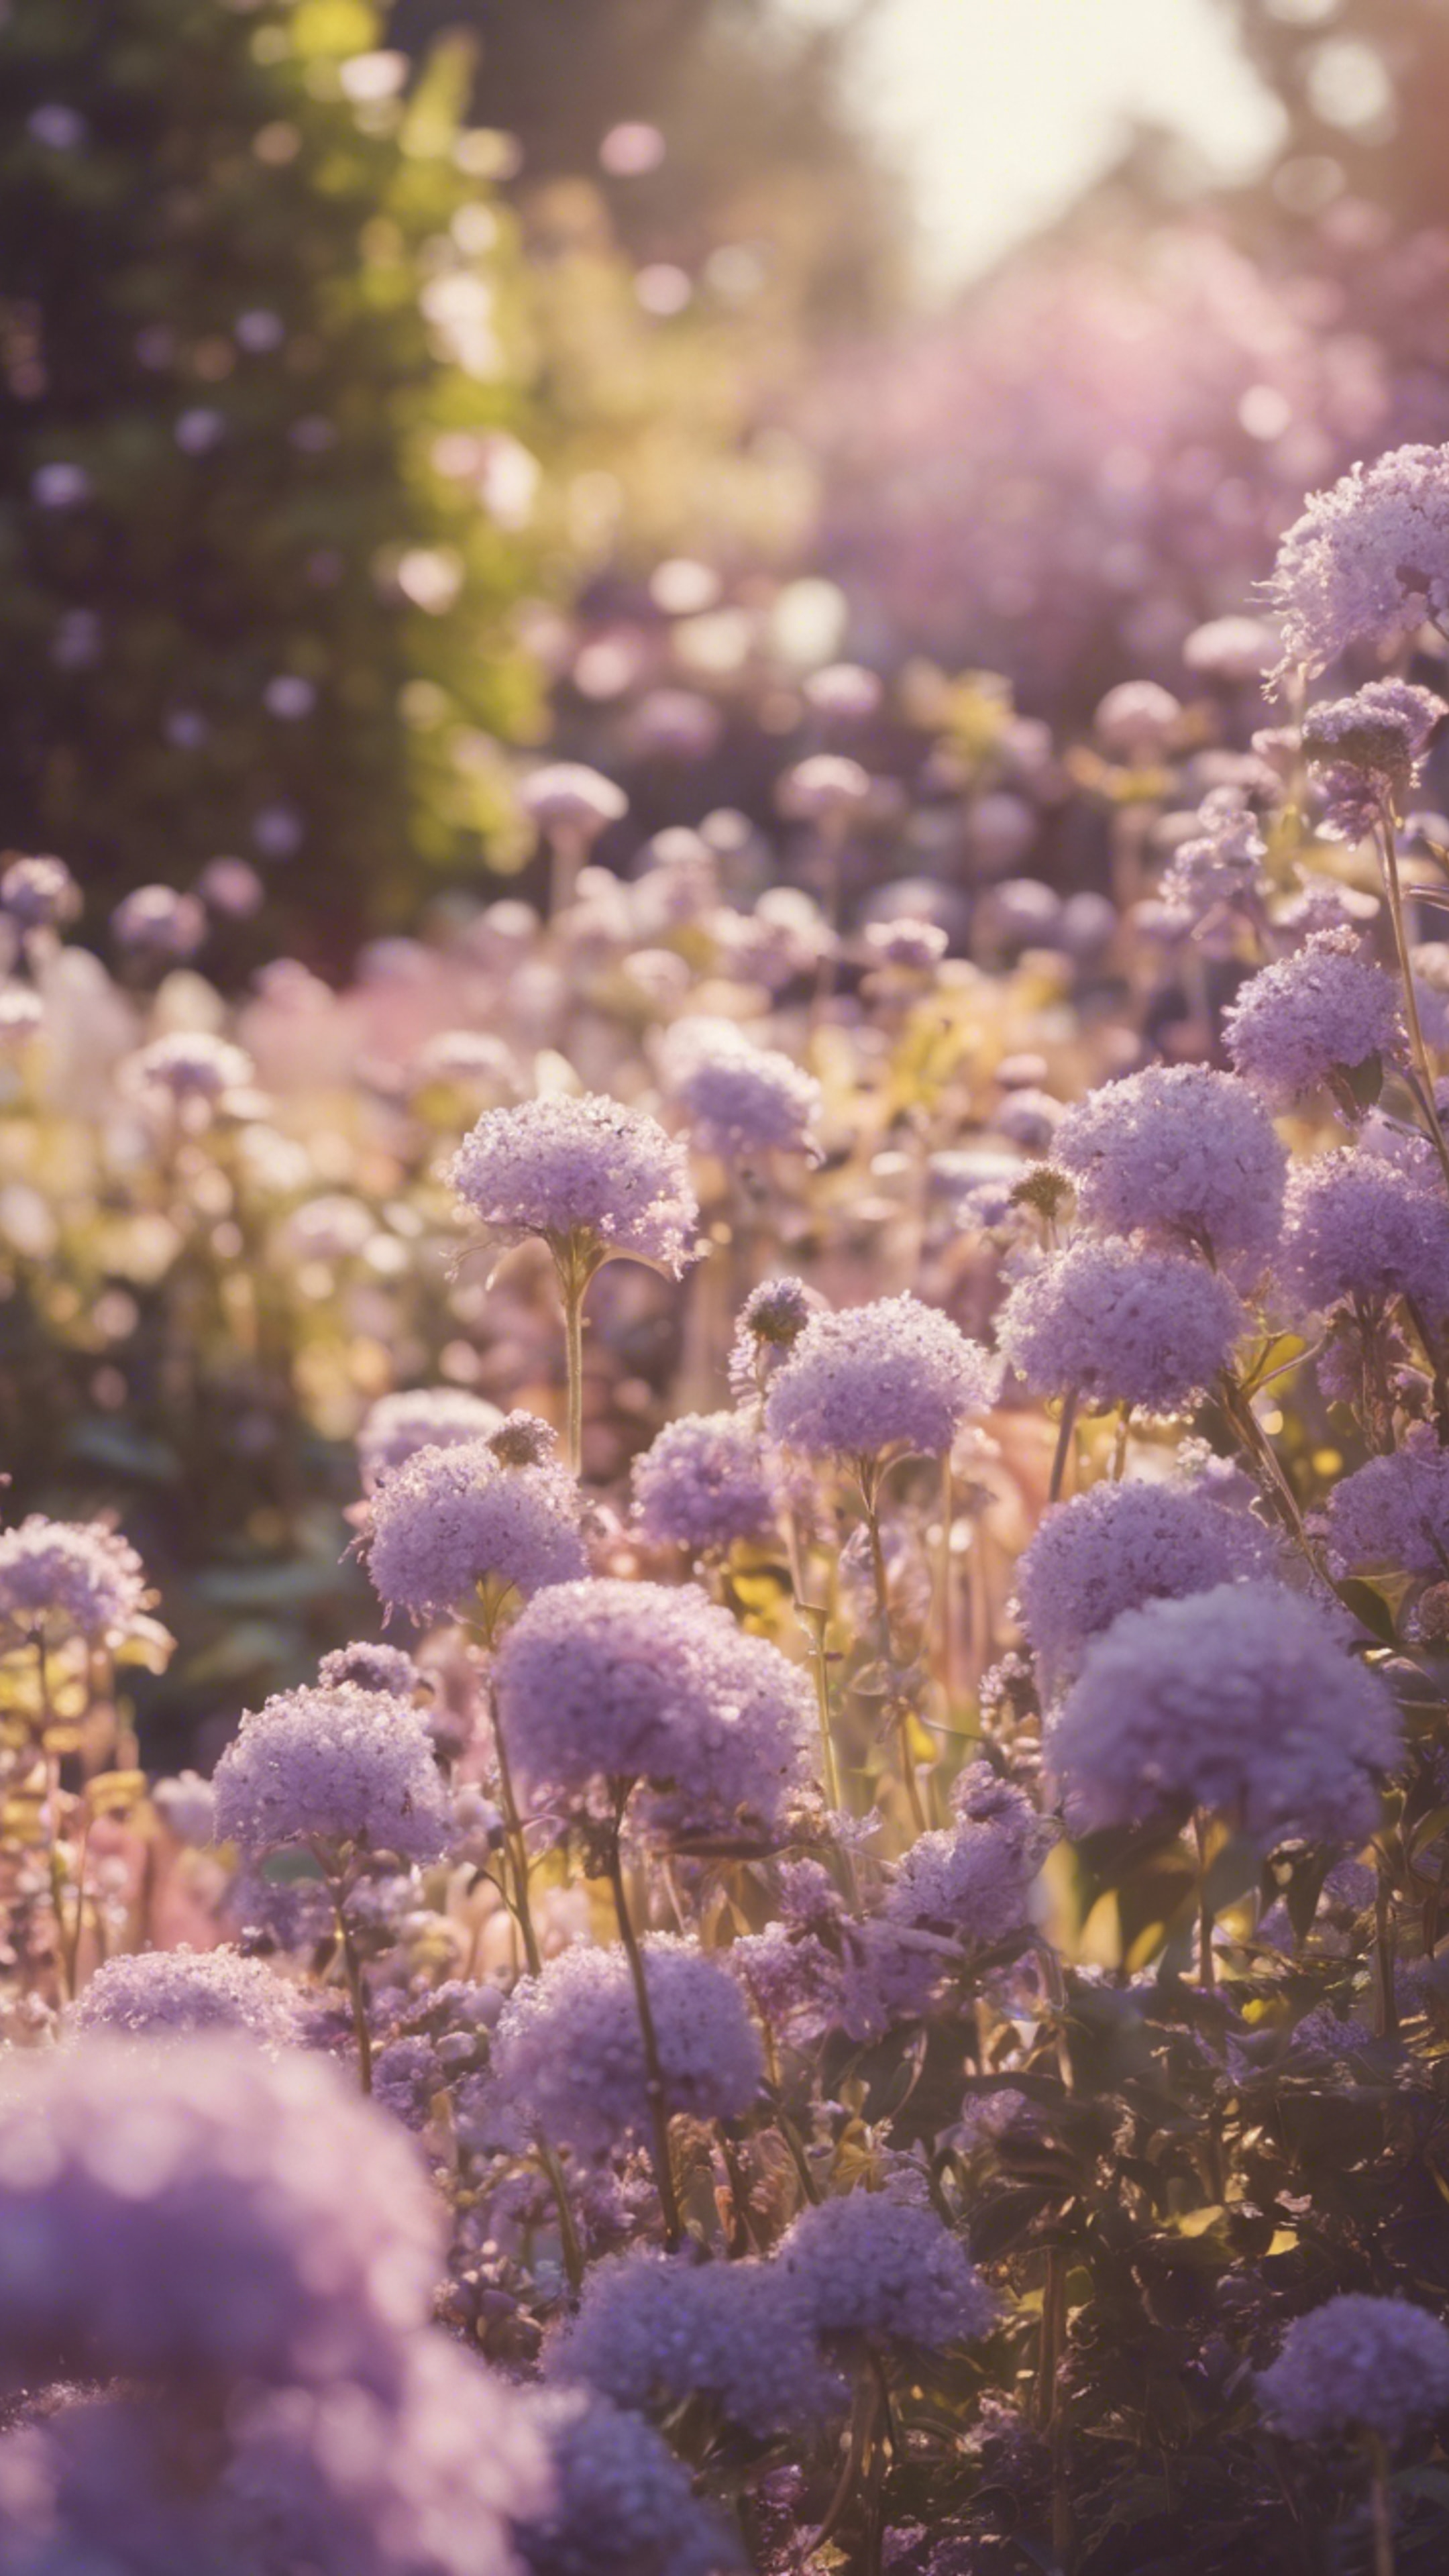 A pastel purple garden in full bloom during a sunny afternoon. Tapeta[0a3f4f6cbc4b447bb231]